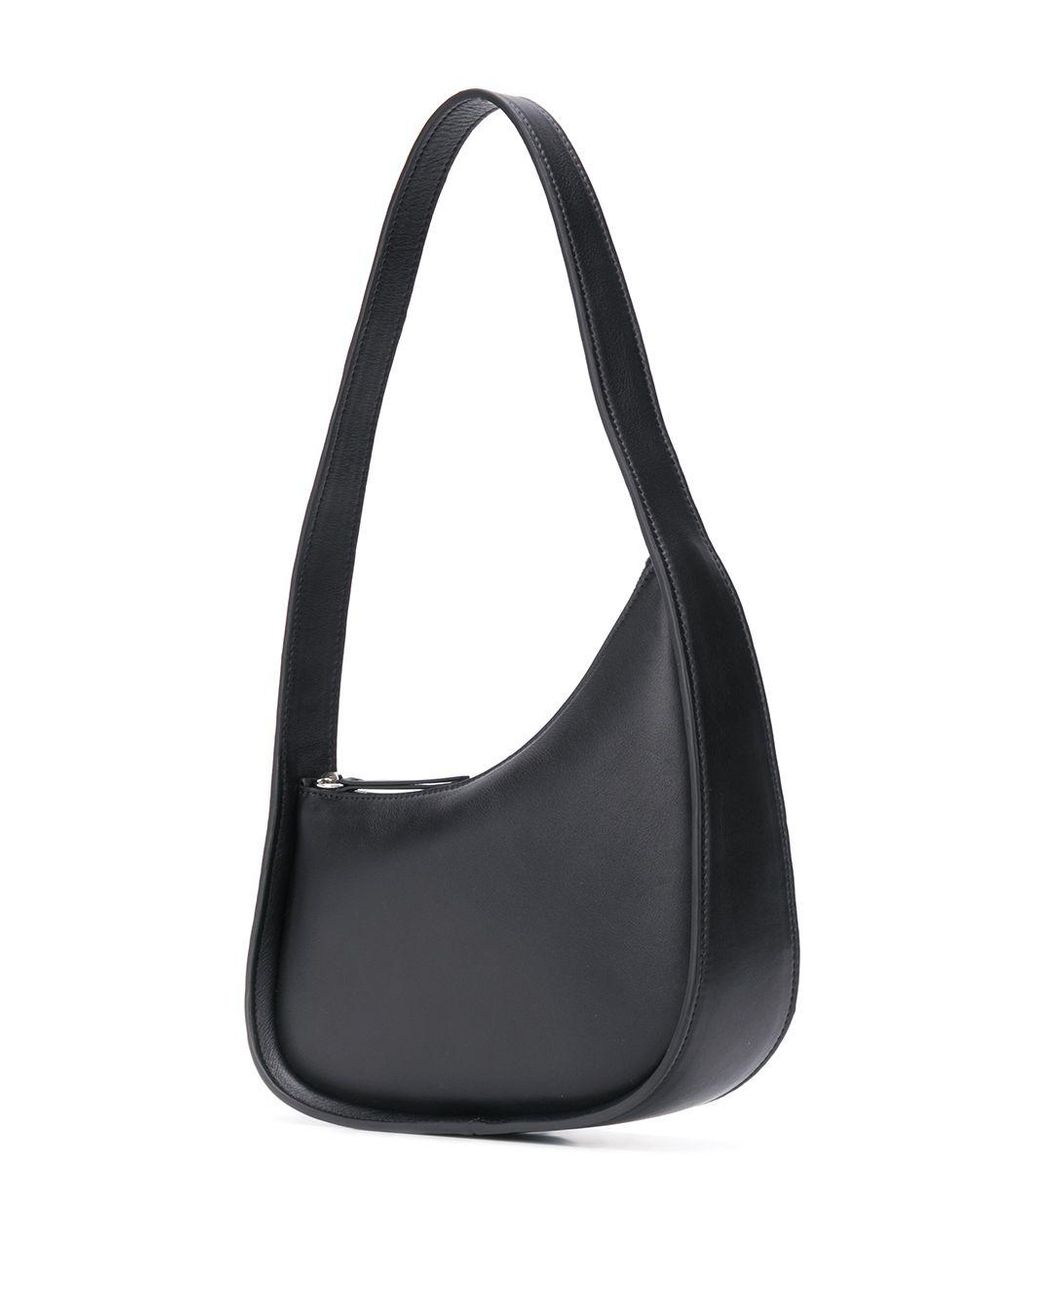 Half Moon Leather Shoulder Bag in Black - The Row